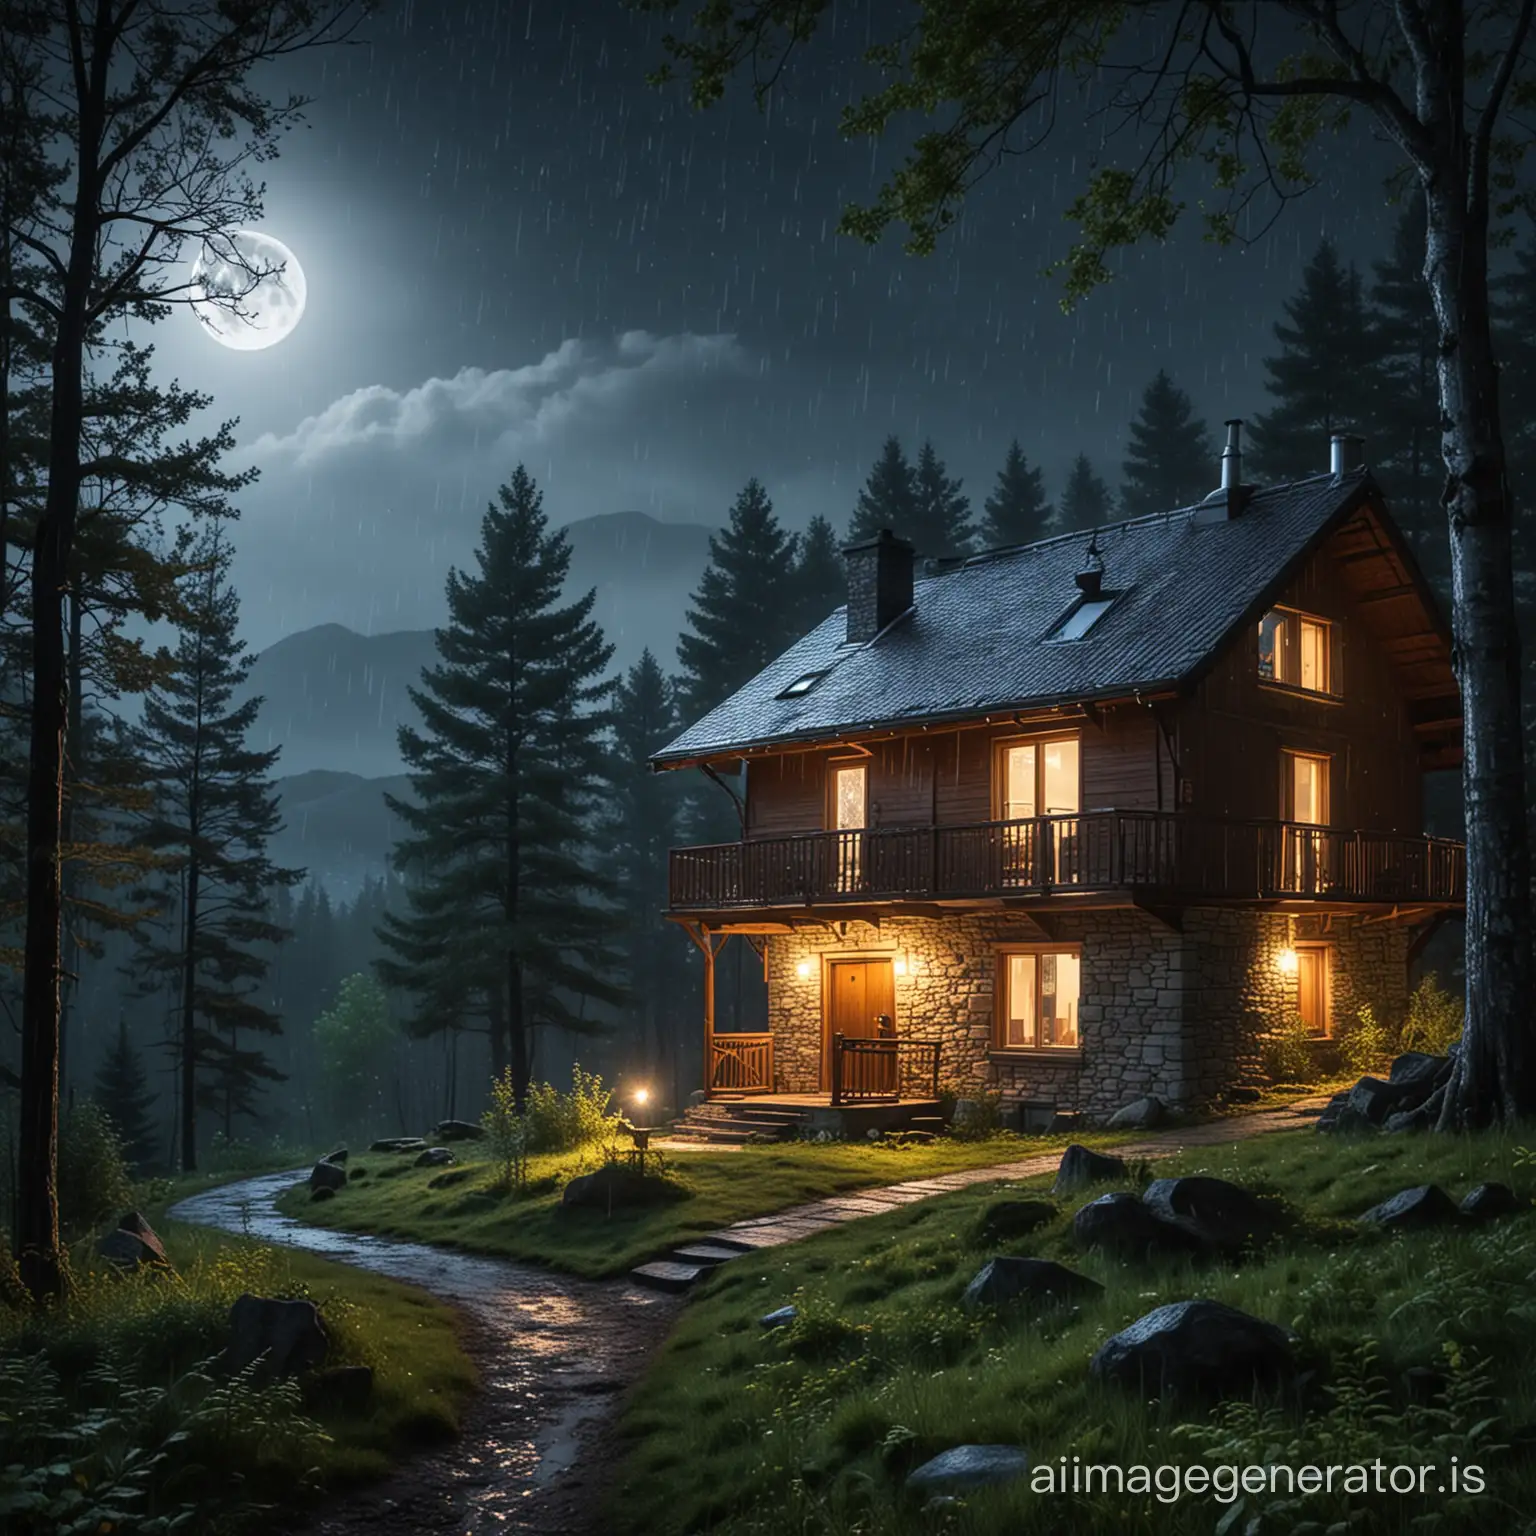 Moonlit-Rainy-Night-in-a-Mountain-Forest-Home